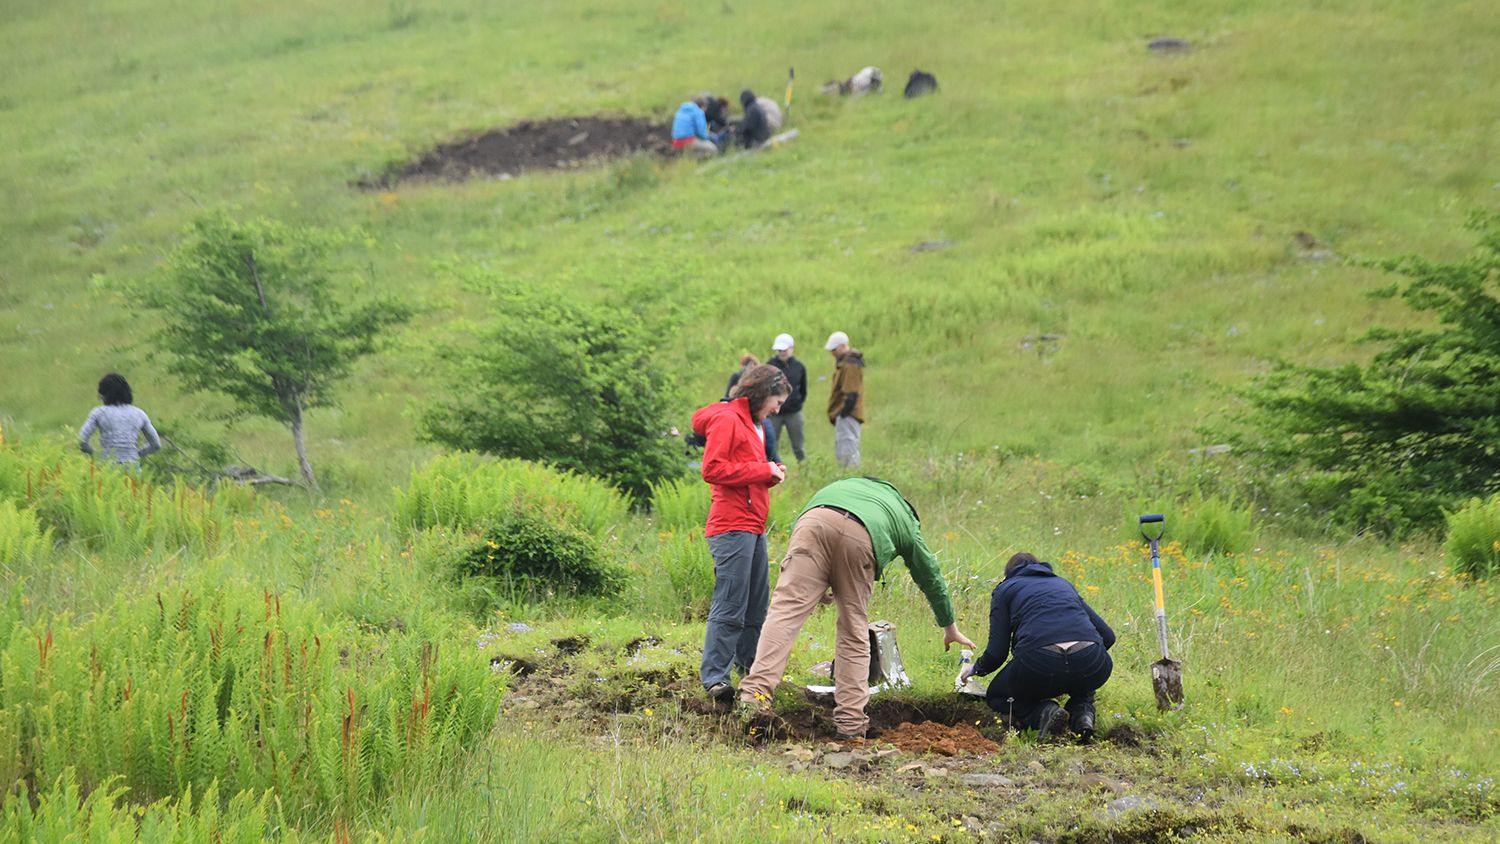 students dig in the soil at a field site.